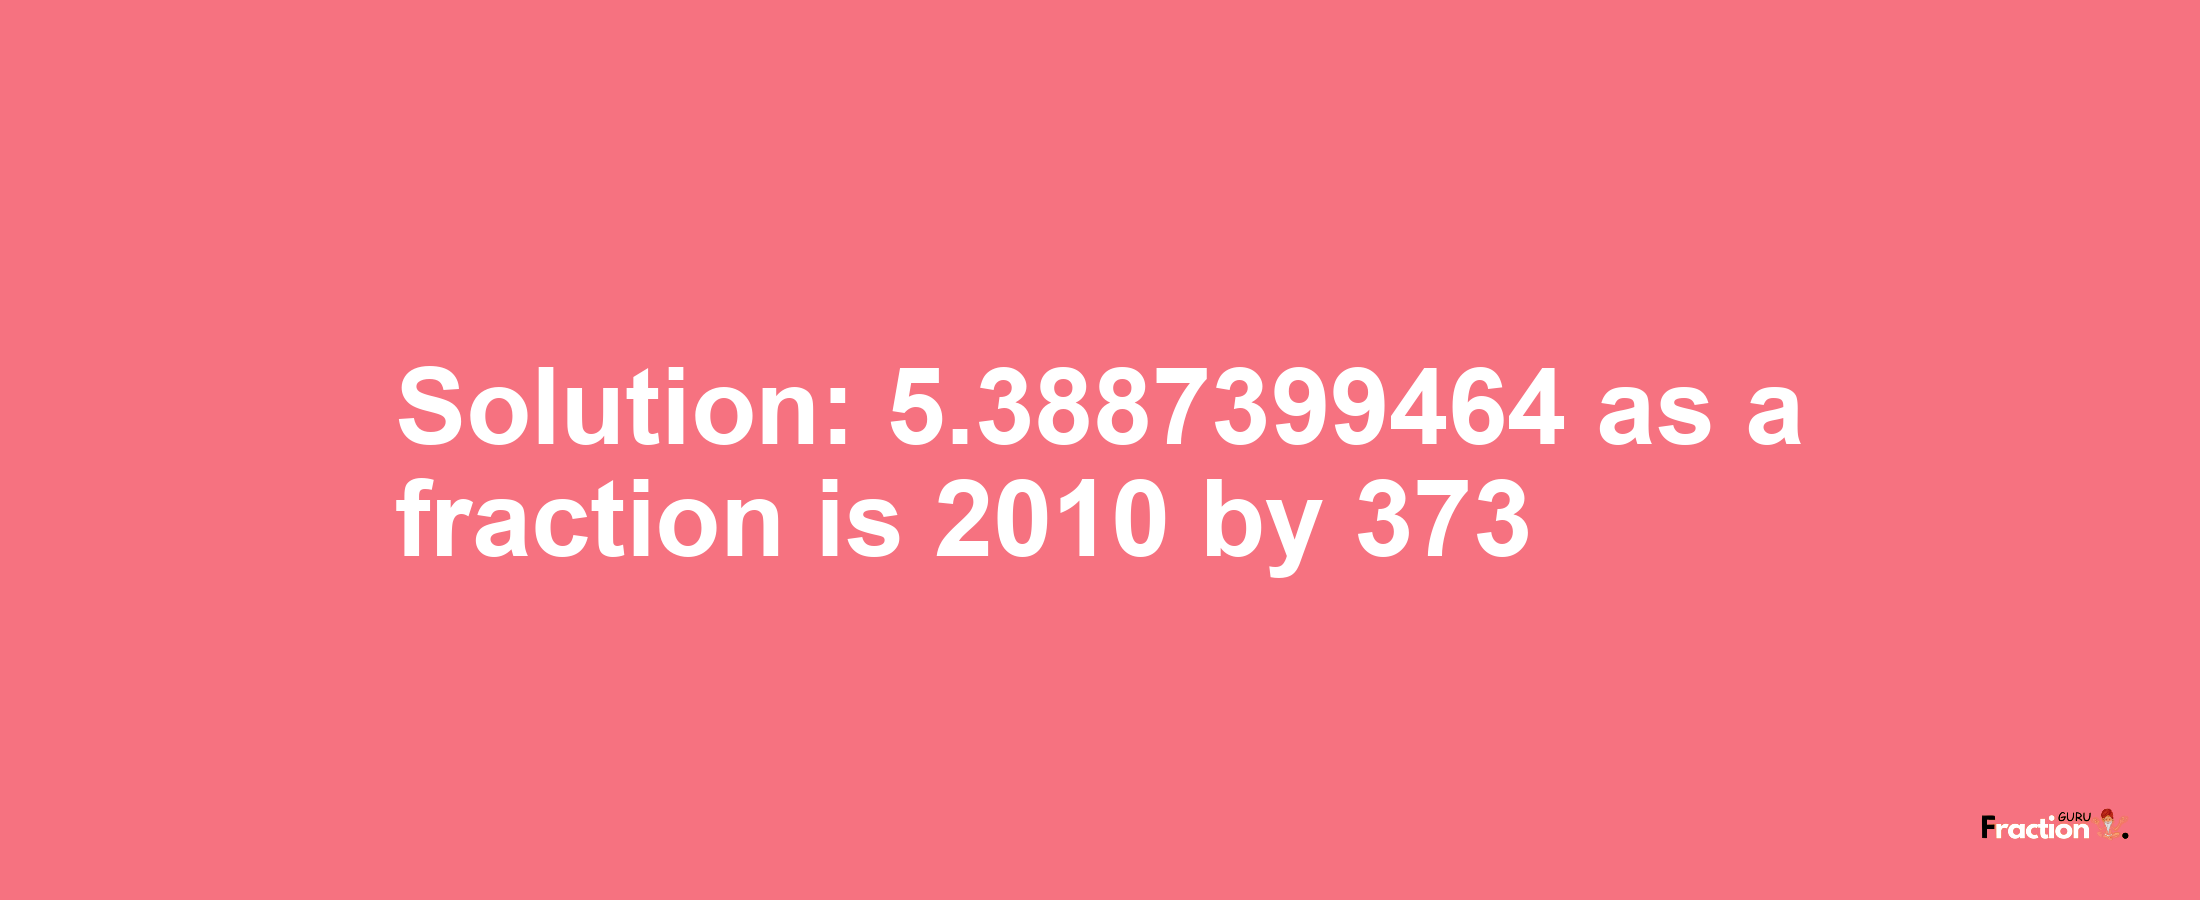 Solution:5.3887399464 as a fraction is 2010/373